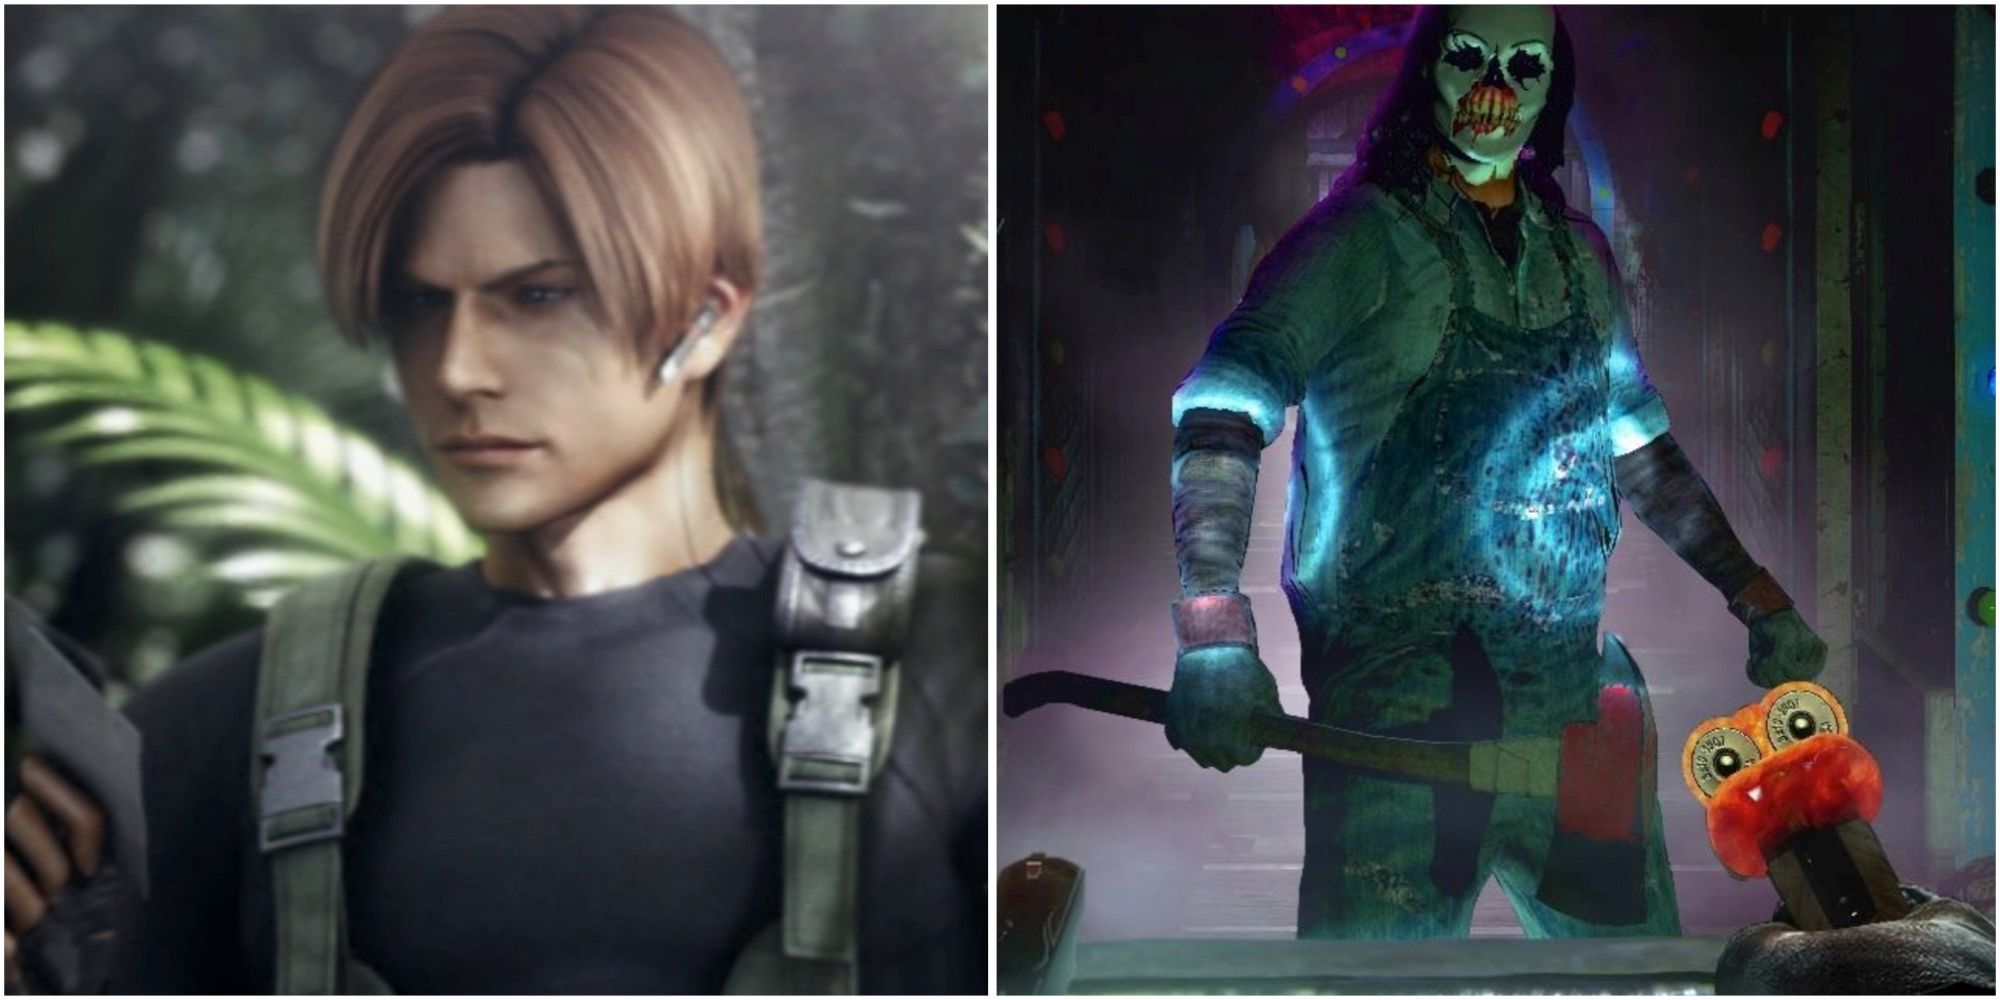 Leon in Resident Evil The Darkside Chronicles and The Psycho in Until Dawn Rush of Blood